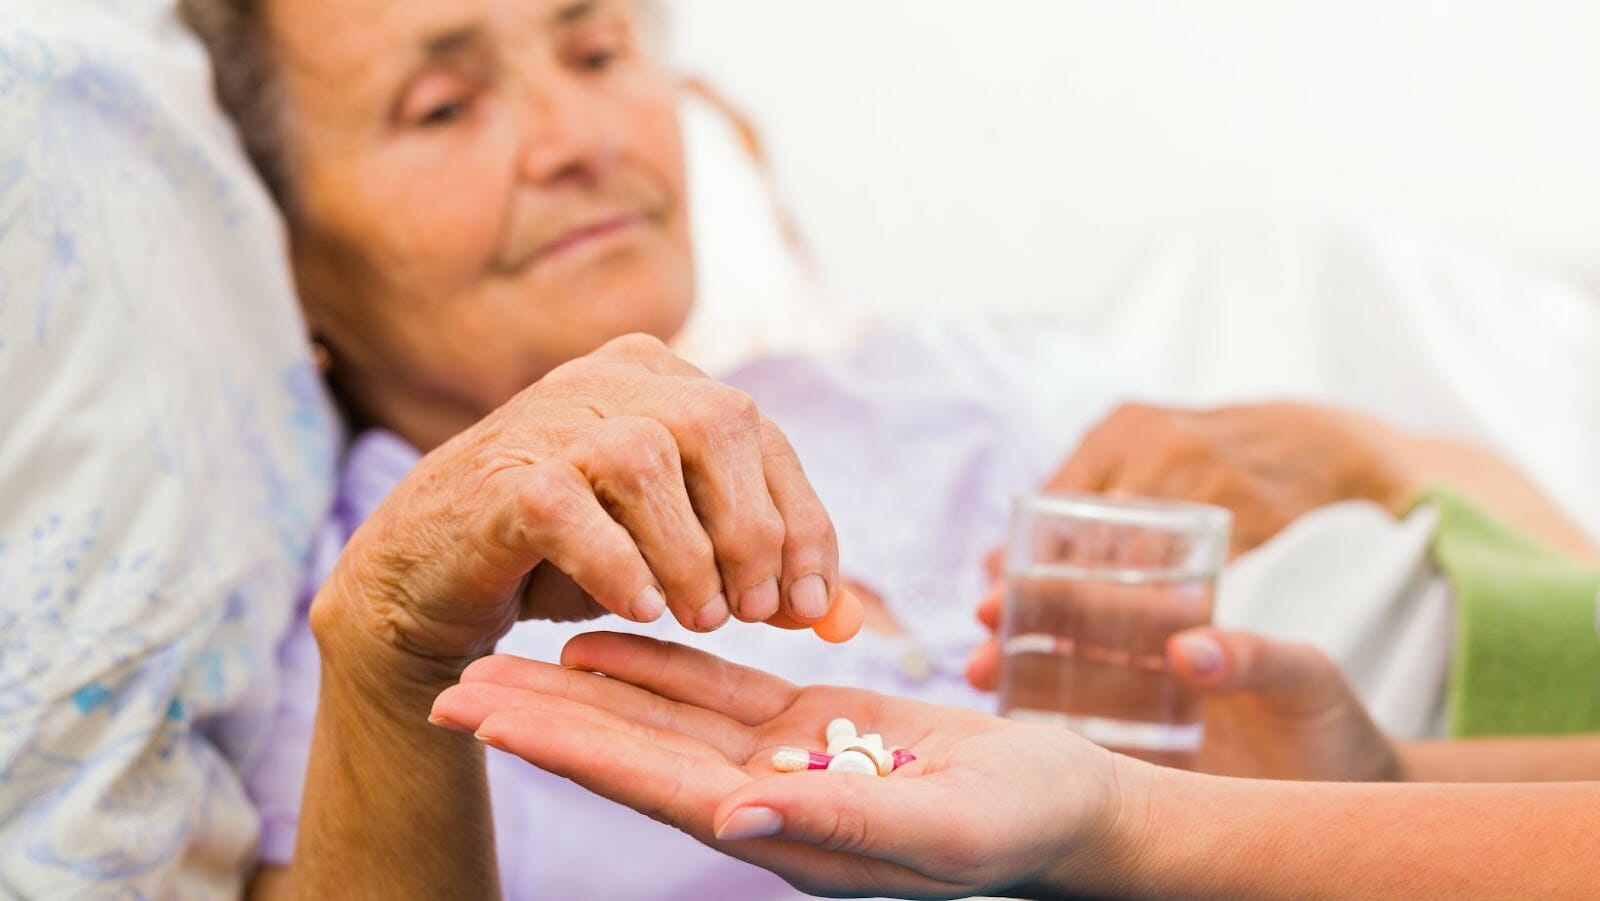 4 Helpful Tips to Manage your Medication